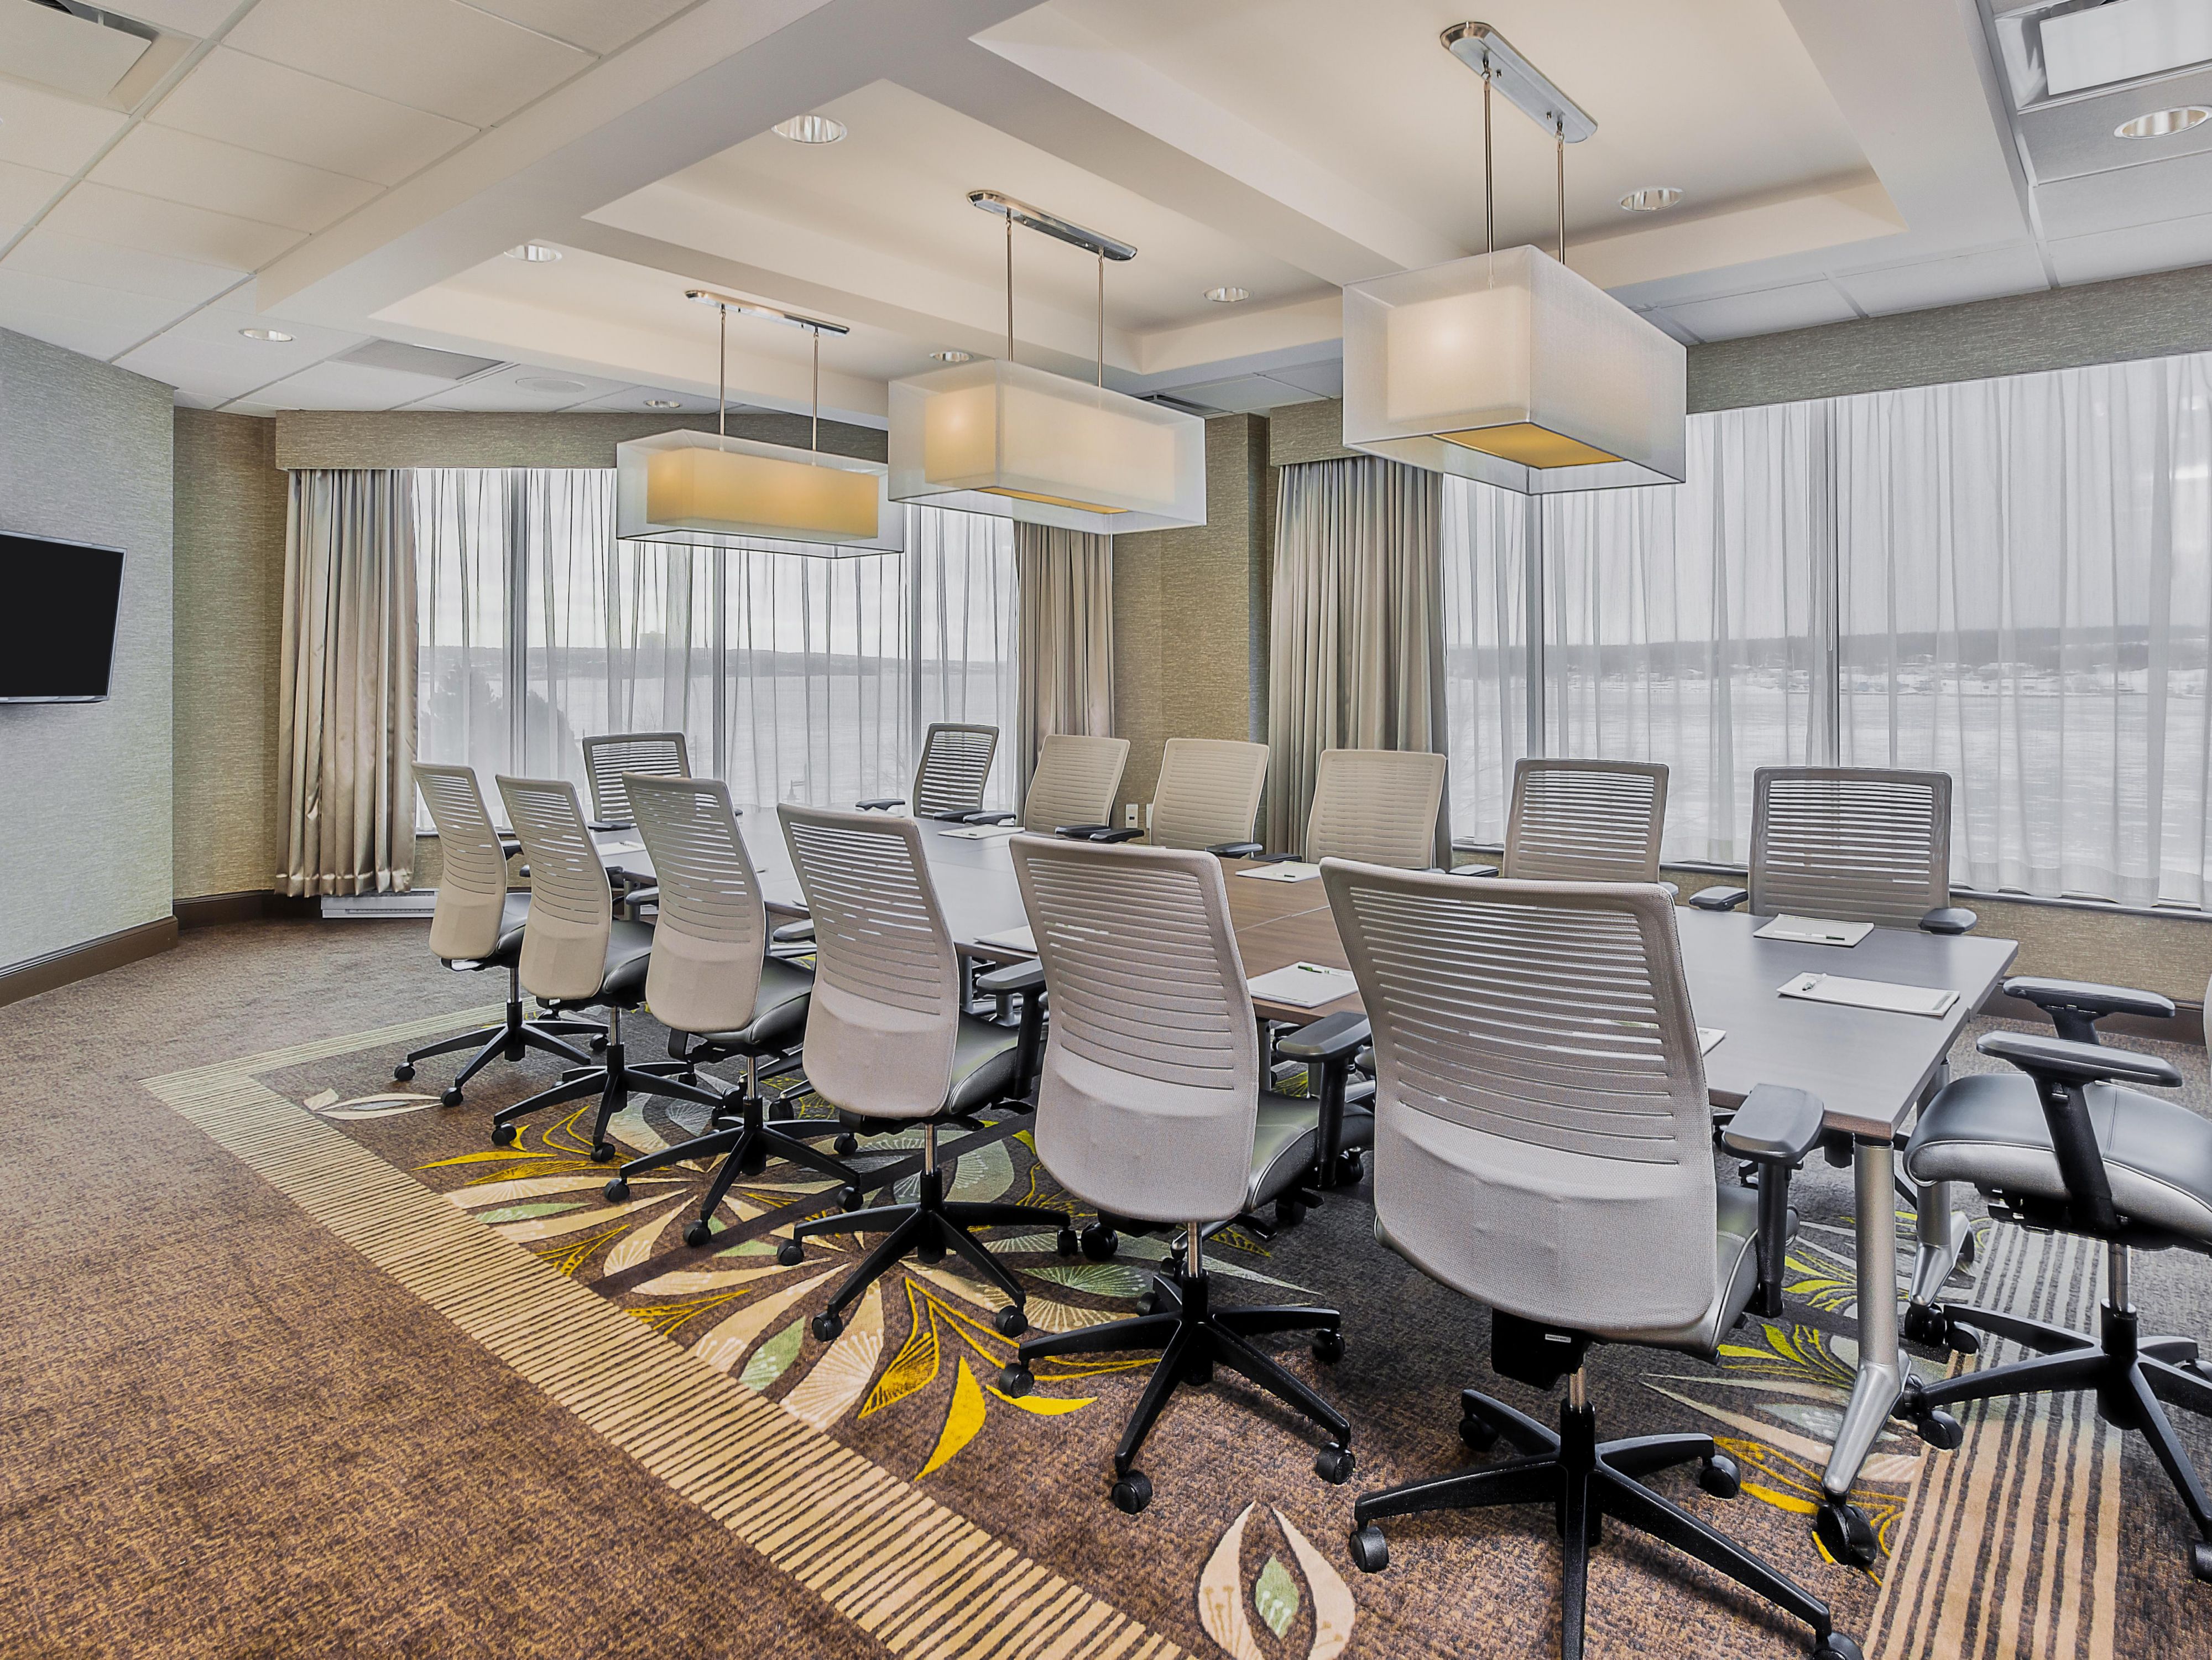 Whenever and wherever you travel, IHG® Hotels & Resorts is ready to meet you there. When you are ready to plan your next meeting or group event. Providing a safe, healthy, and clean stay for every traveler has always been important to us and this allows you to stay focused on your meeting objectives. 